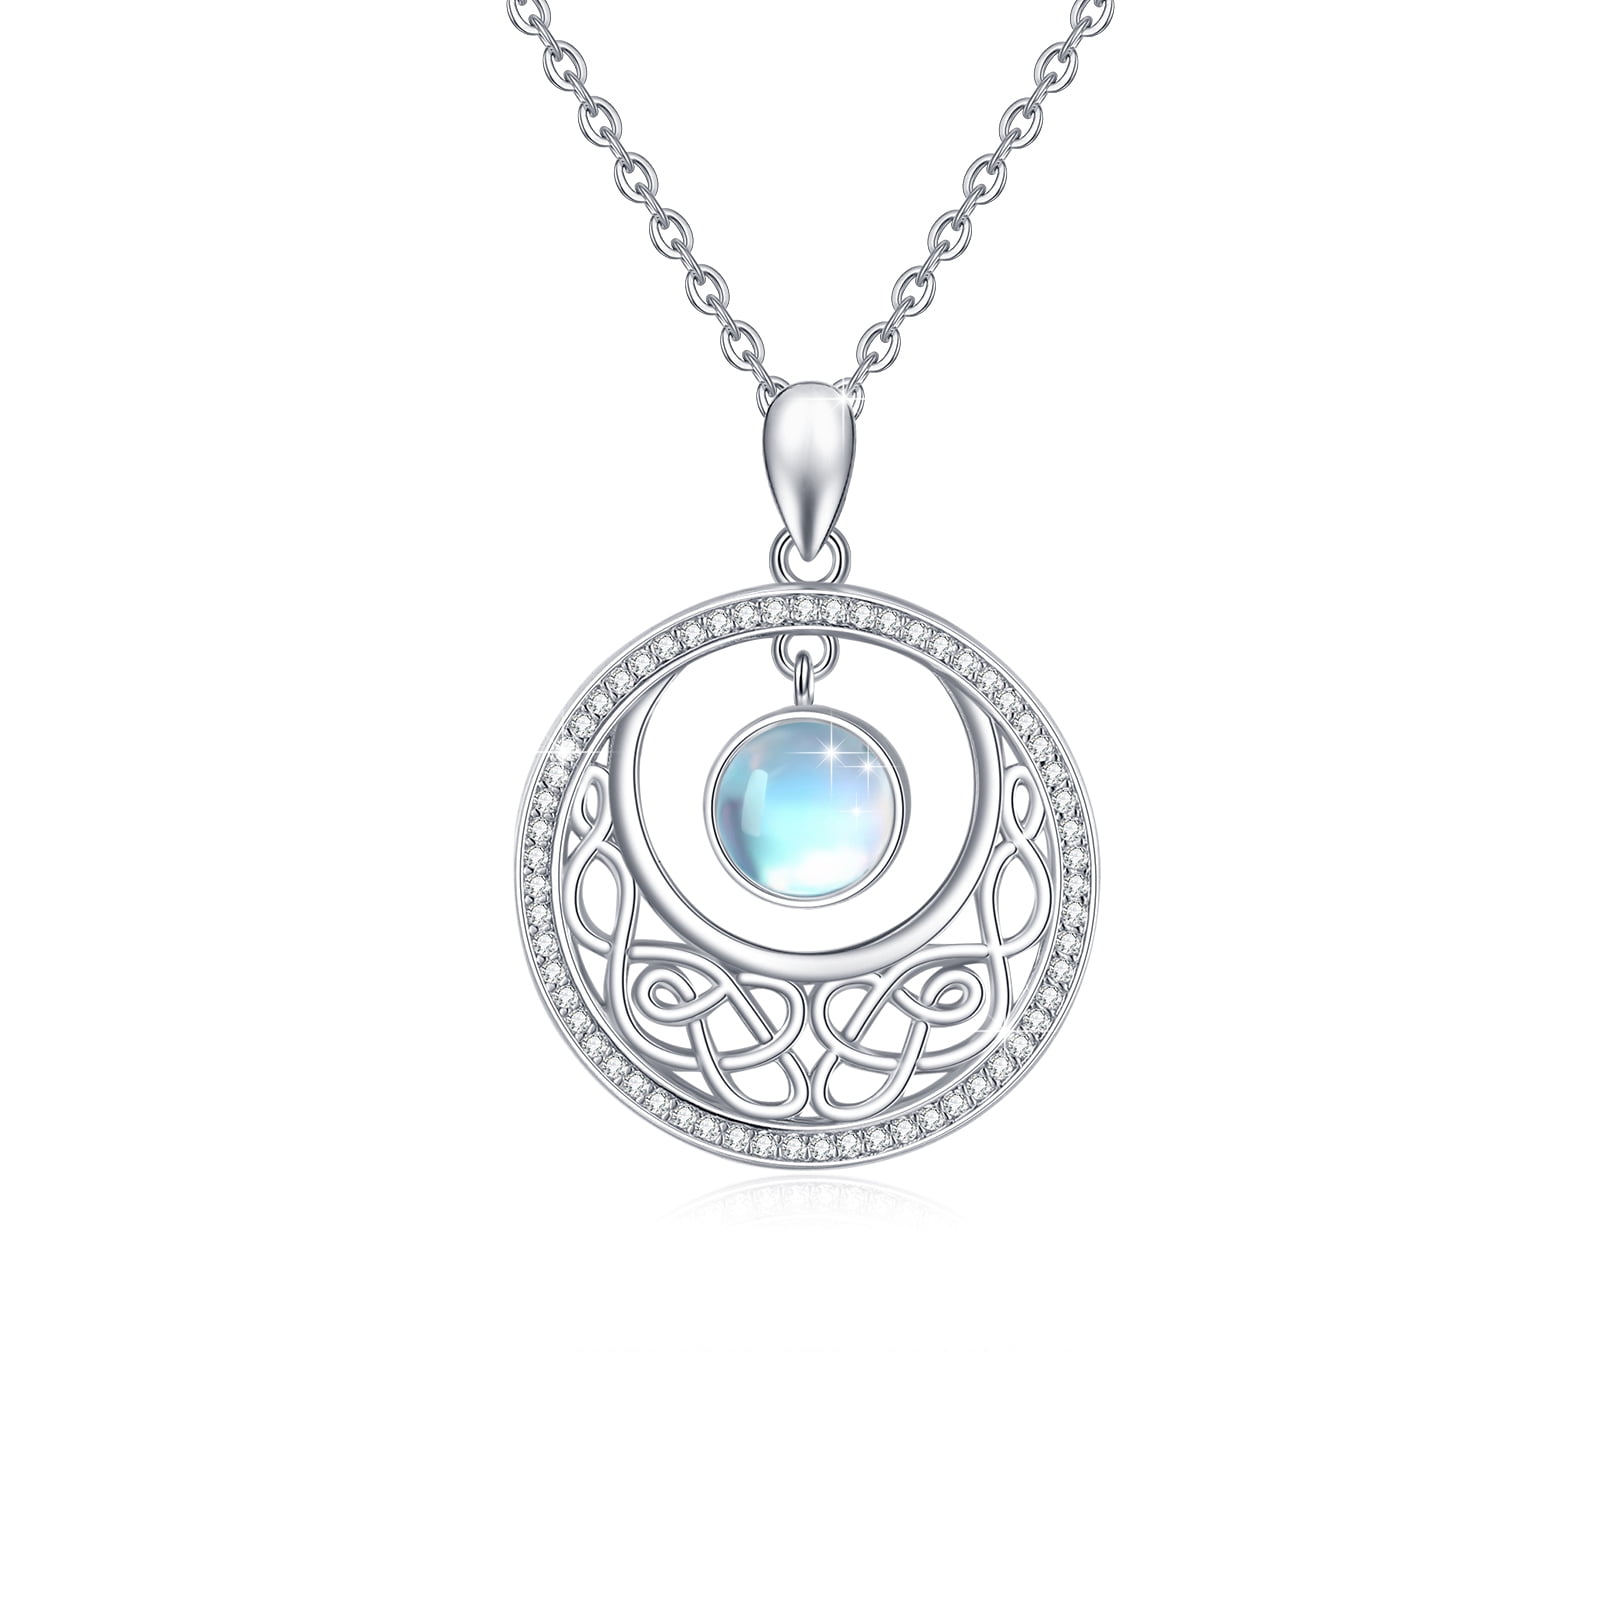 CUOKA MIRACLE Crescent Moon Necklace Moonstone Necklace 925 Sterling ...